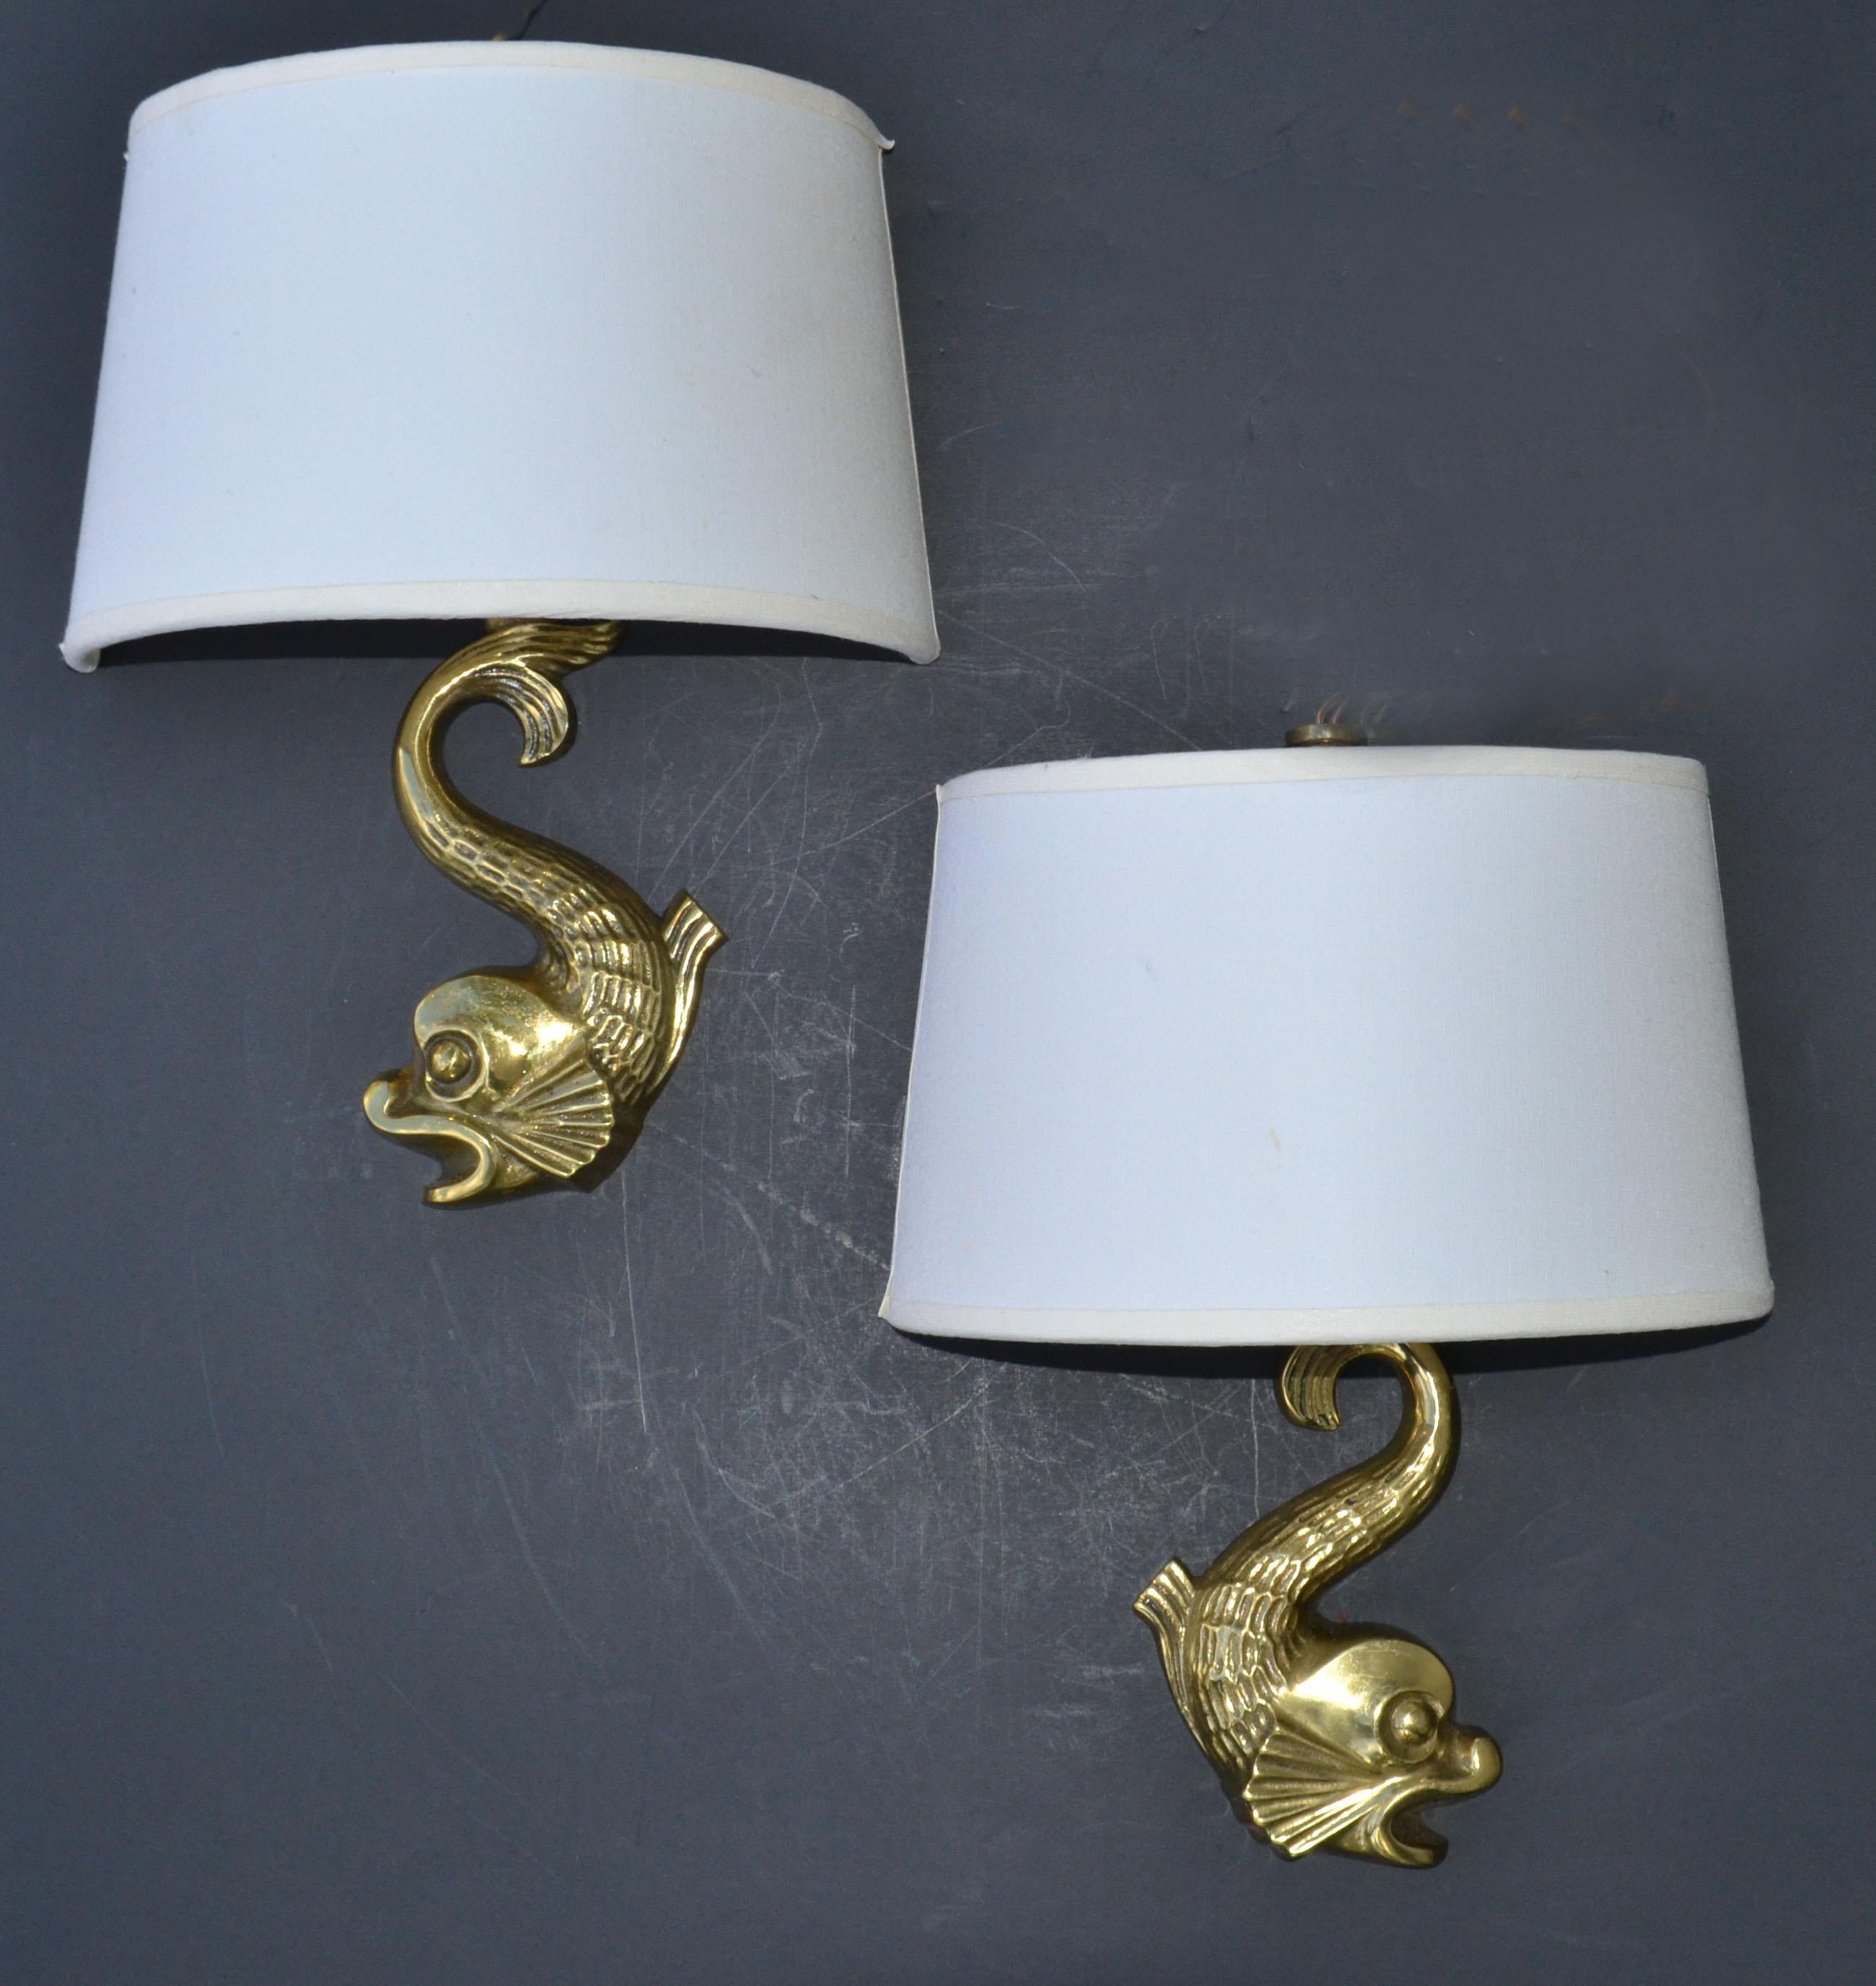 Pair of bronze Dolphin sconces, wall lamps style of E. Guillemard and made in France in the 1950.
In working condition and each takes a max. 60 watts candelabra light bulb.
Sold with newly made Custom Shades.
Measures: 8 x 5 x 4 inches